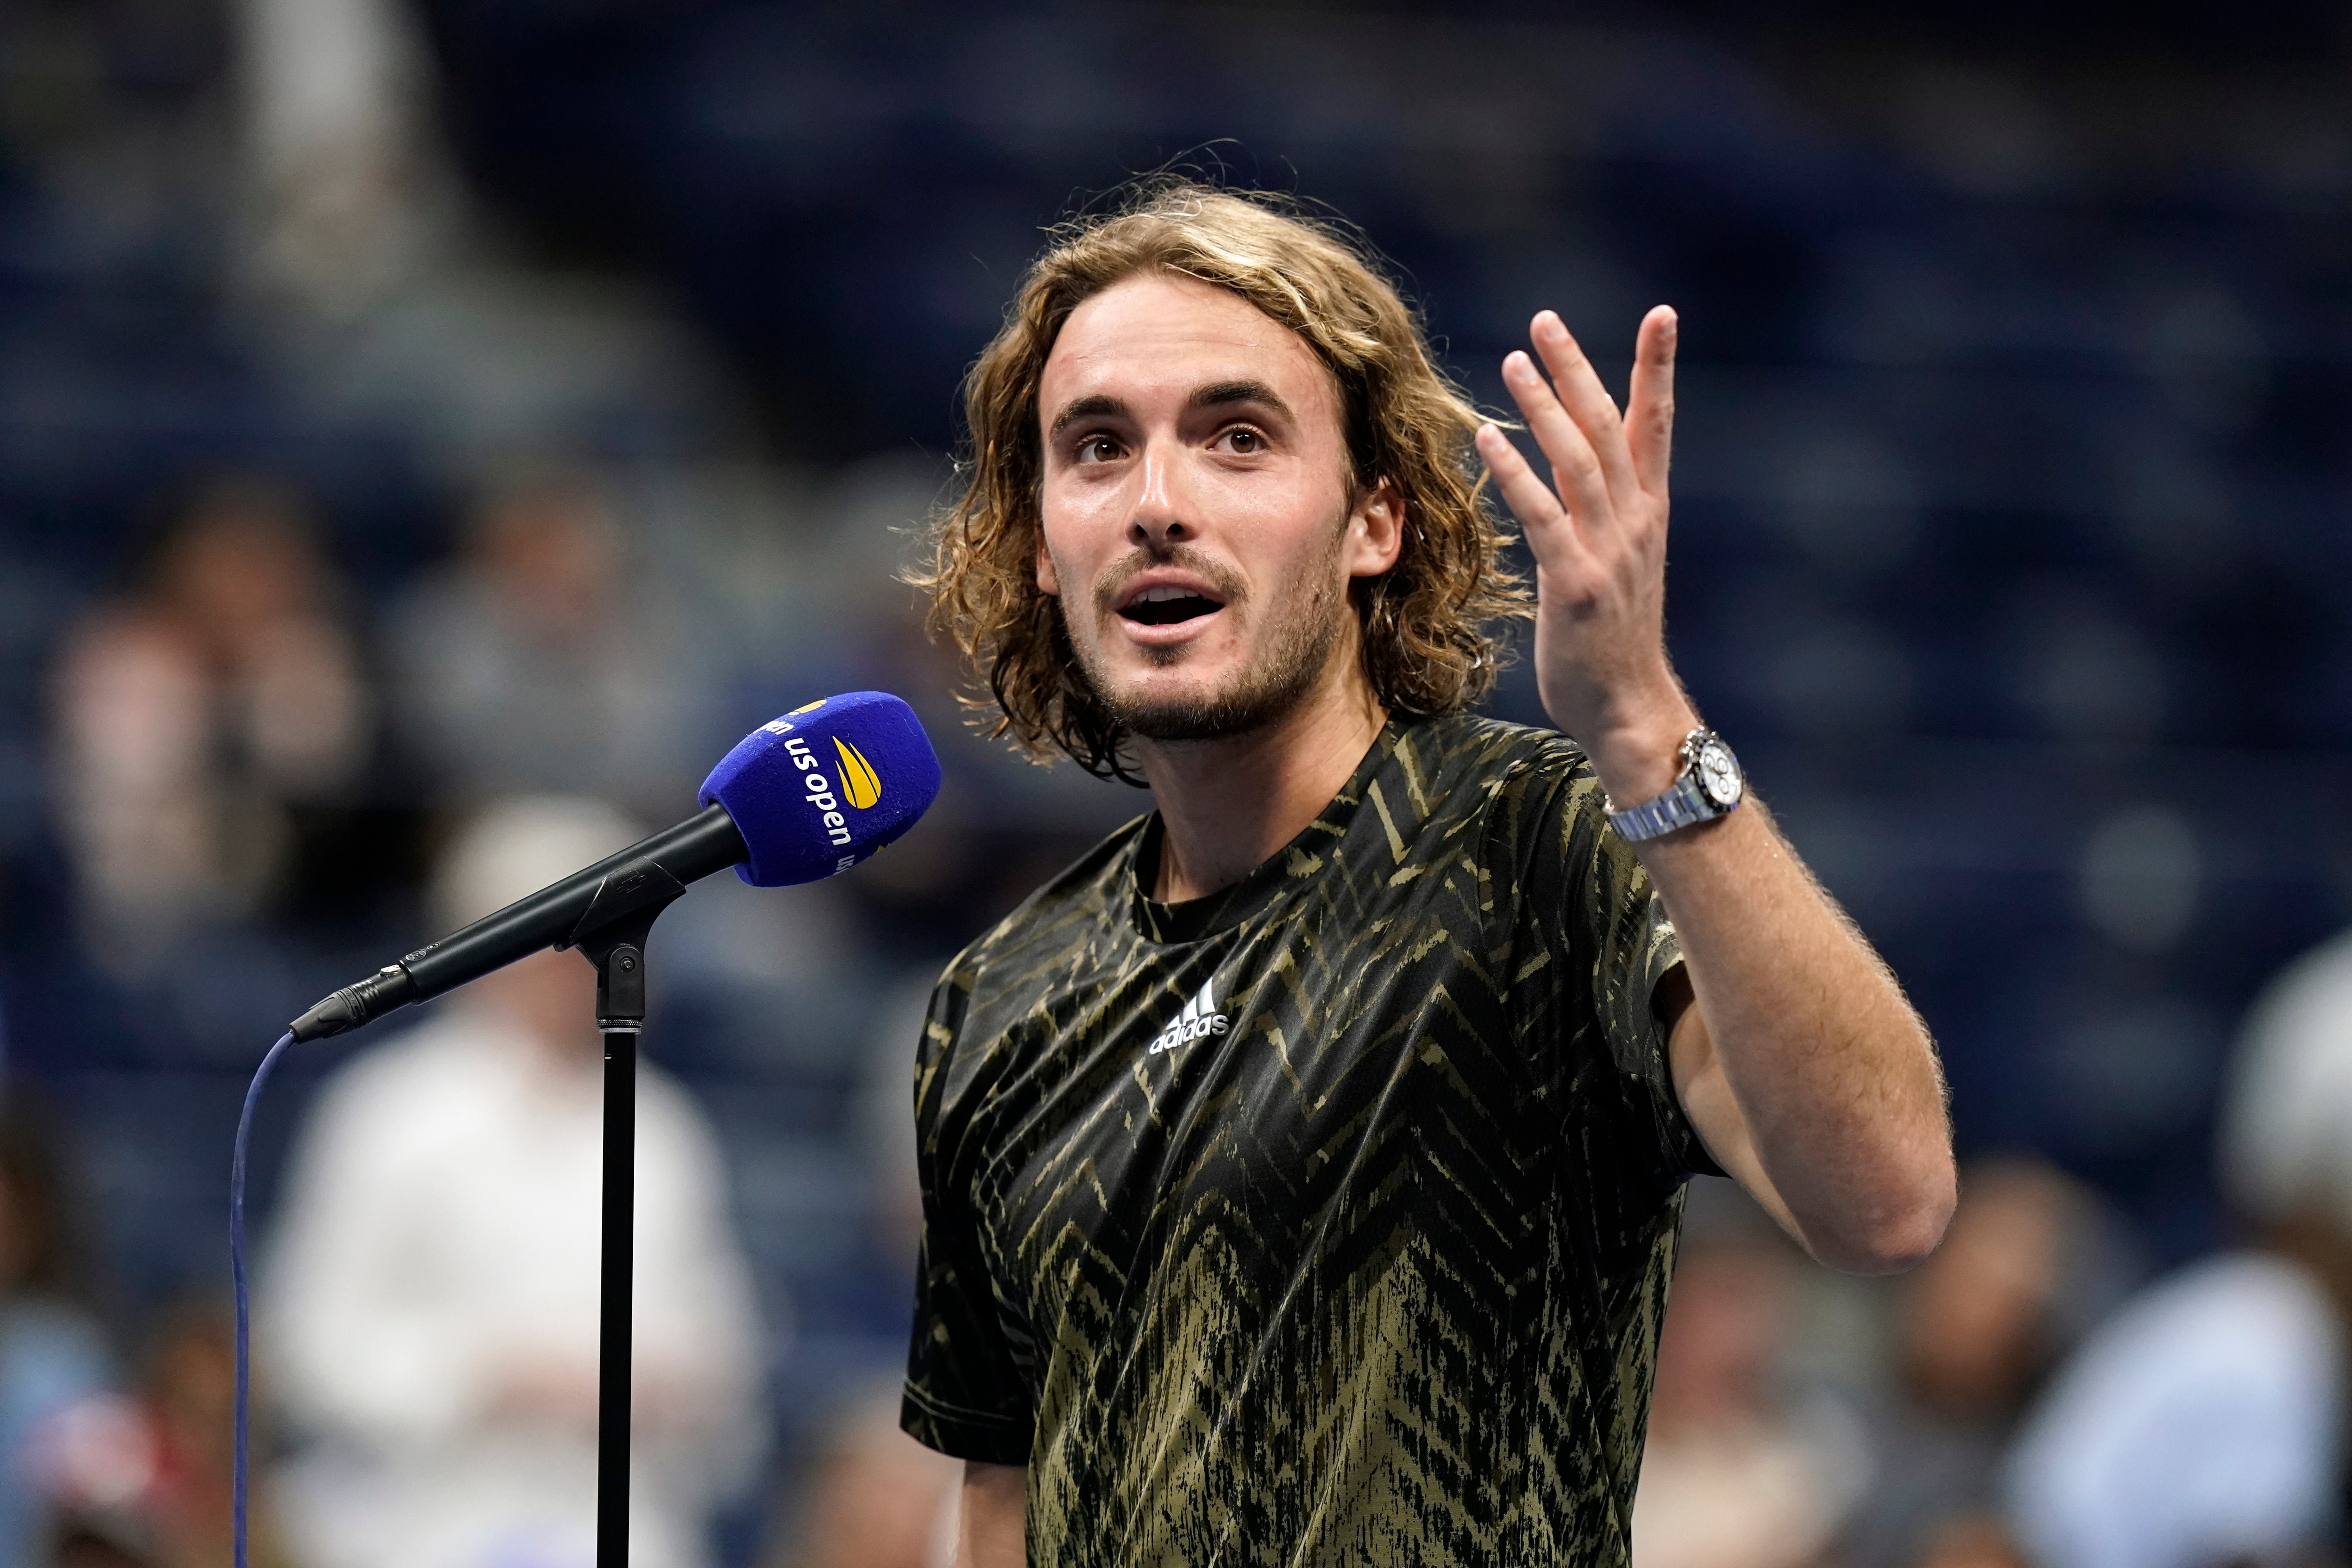 Tsitsipas was jeered by the crowd after his comfort break (Frank Franklin II/AP)